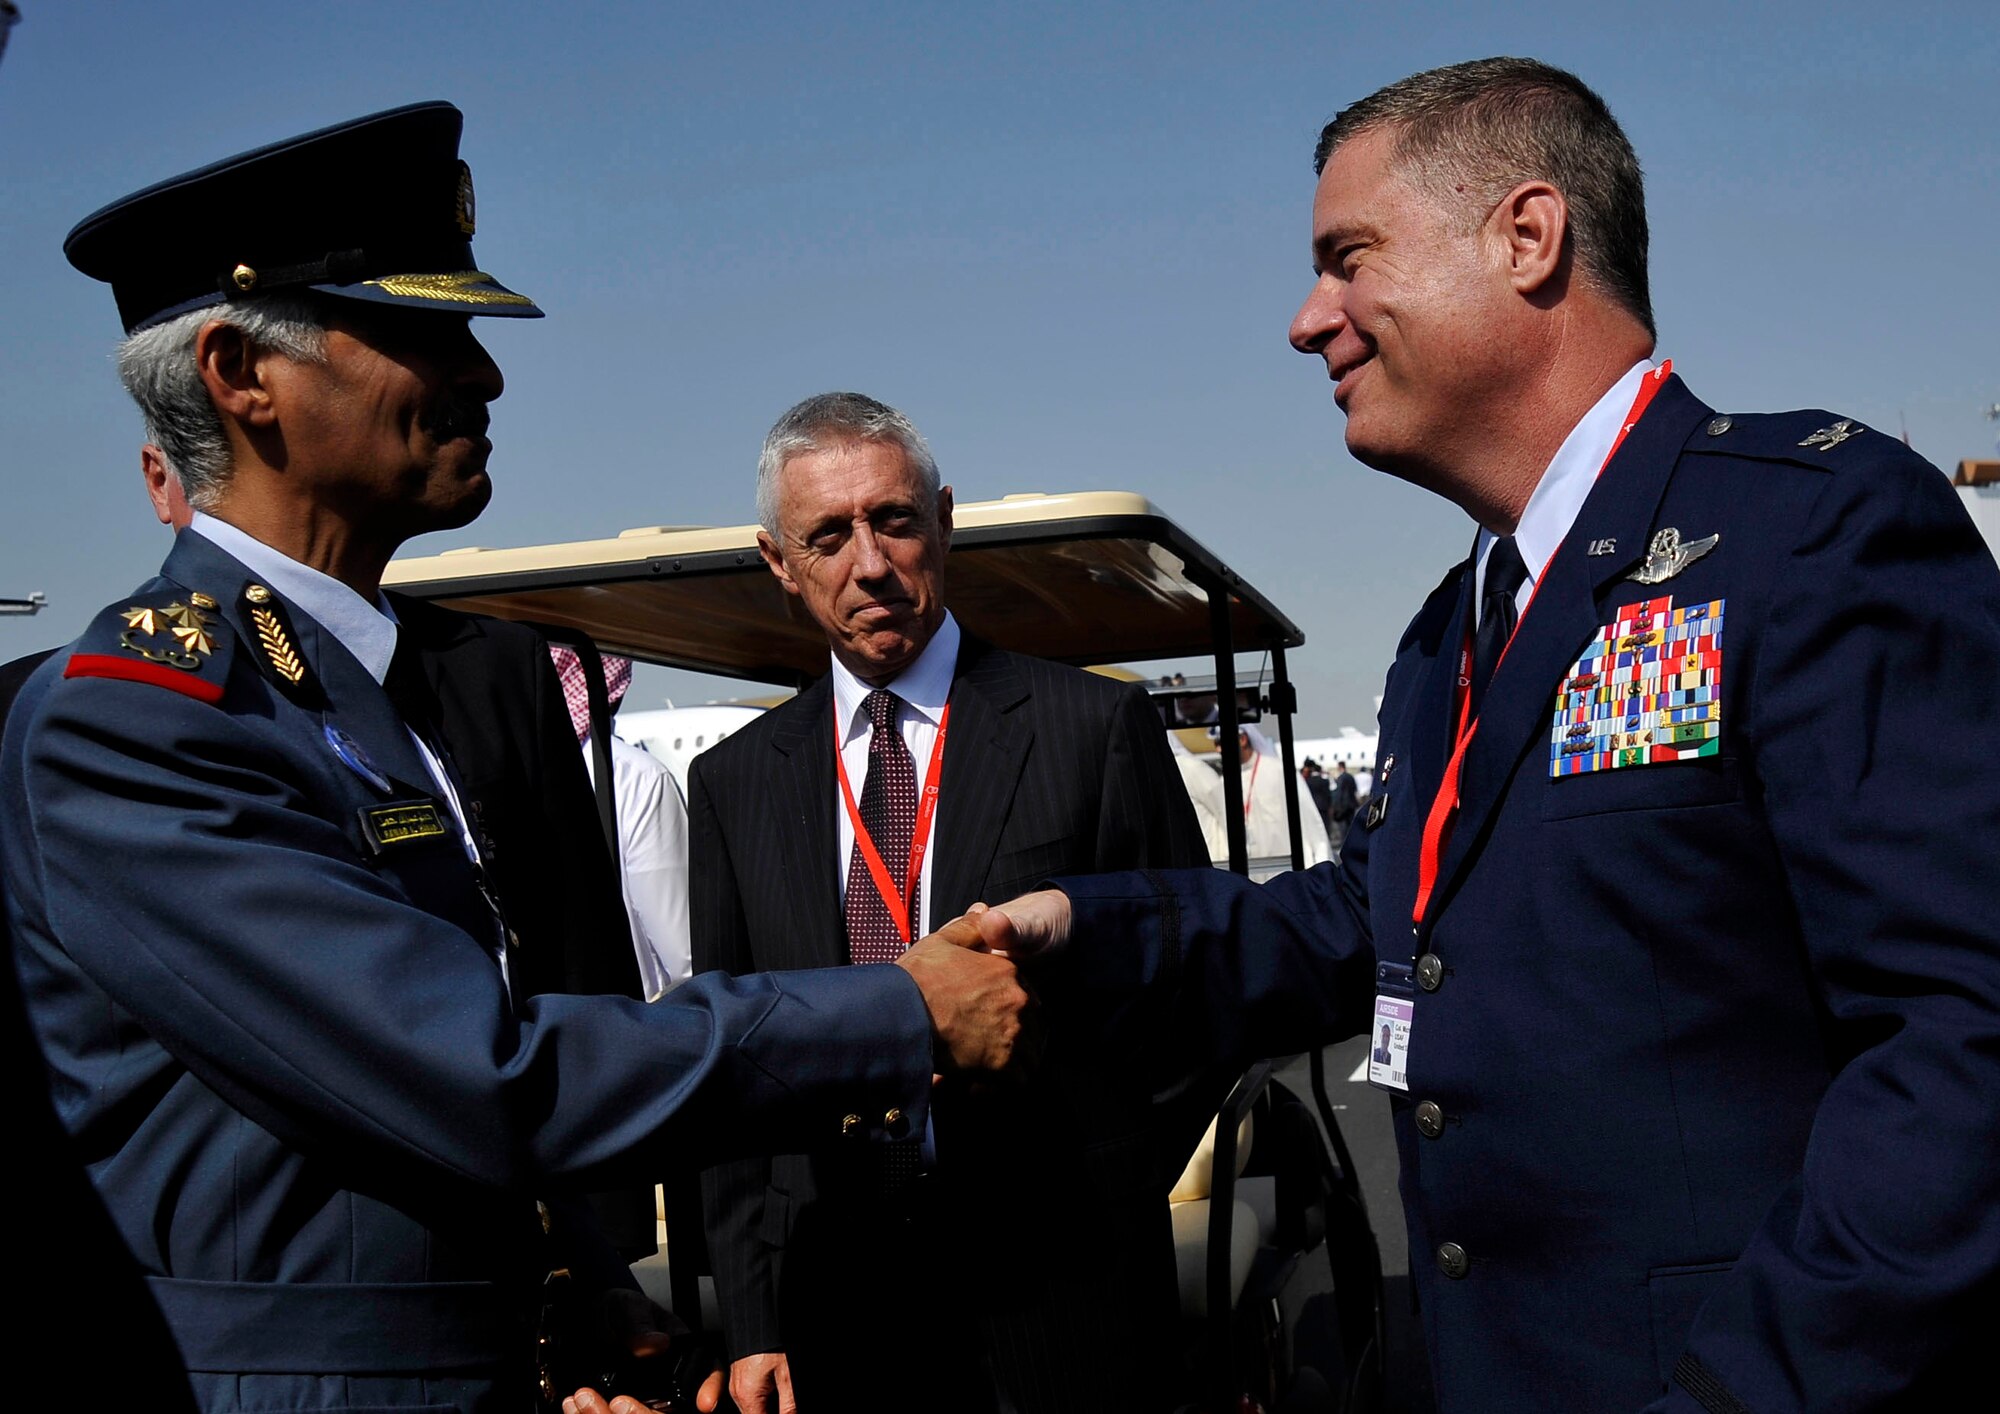 U.S. Air Force Col. Michael Cosby, Kuwait Air Force Operational Advisor, shakes hands with a member of the Bahraini Air Force during the Bahrain International Airshow Jan. 21, 2010. (U.S. Air Force photo/ Staff Sgt. Angelita Lawrence/released)